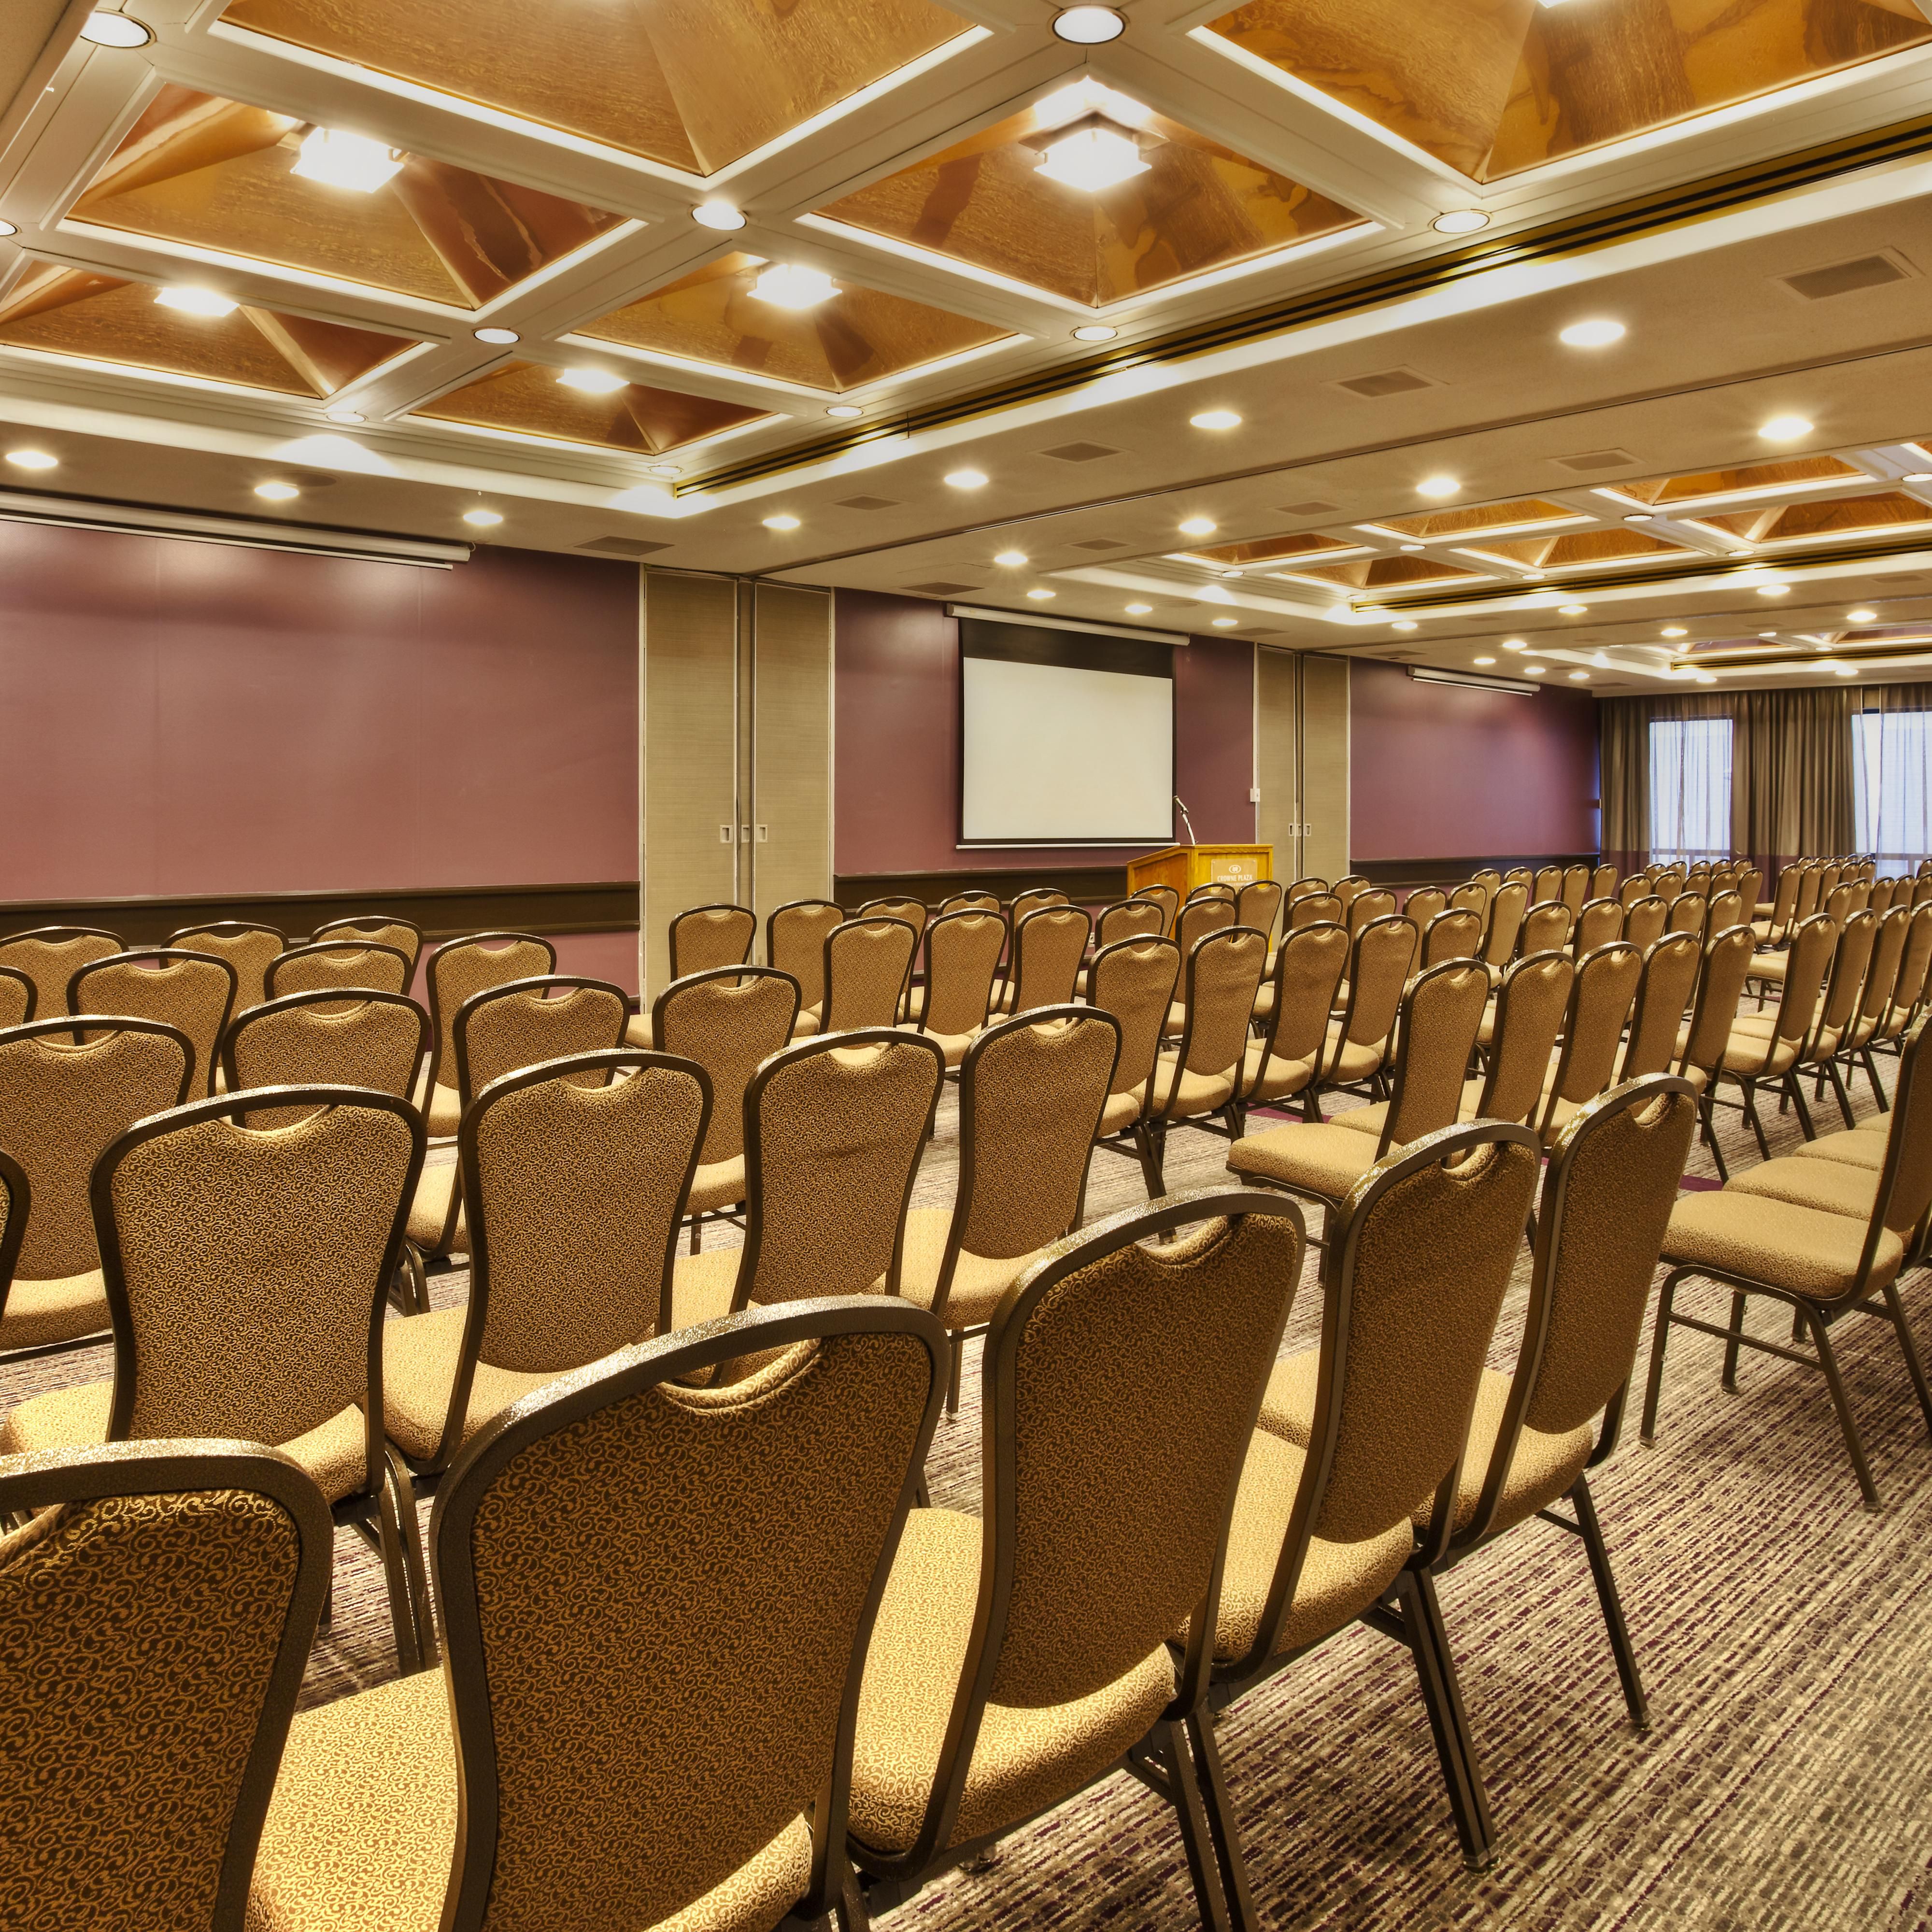 Crowne Plaza Kitchener is the perfect venue for your conference